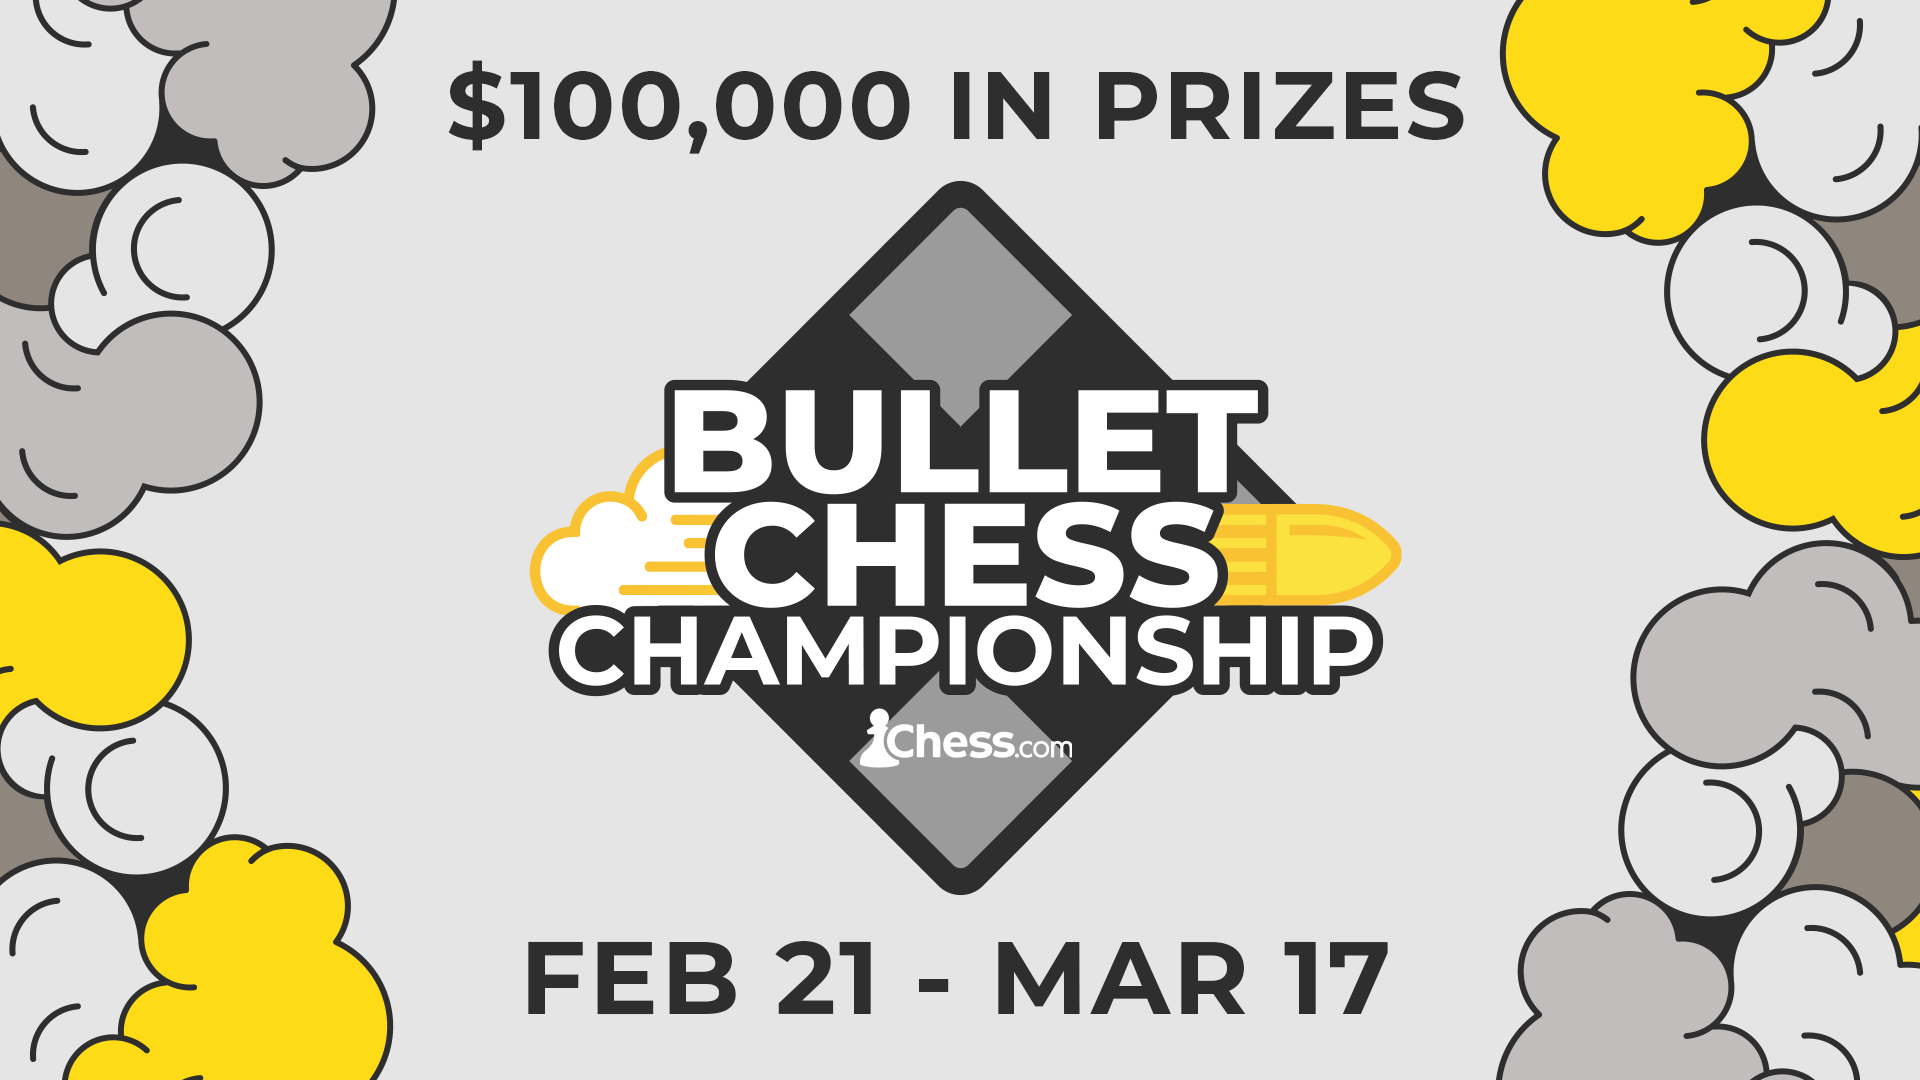 2022 Bullet Chess Championship: All The Information 